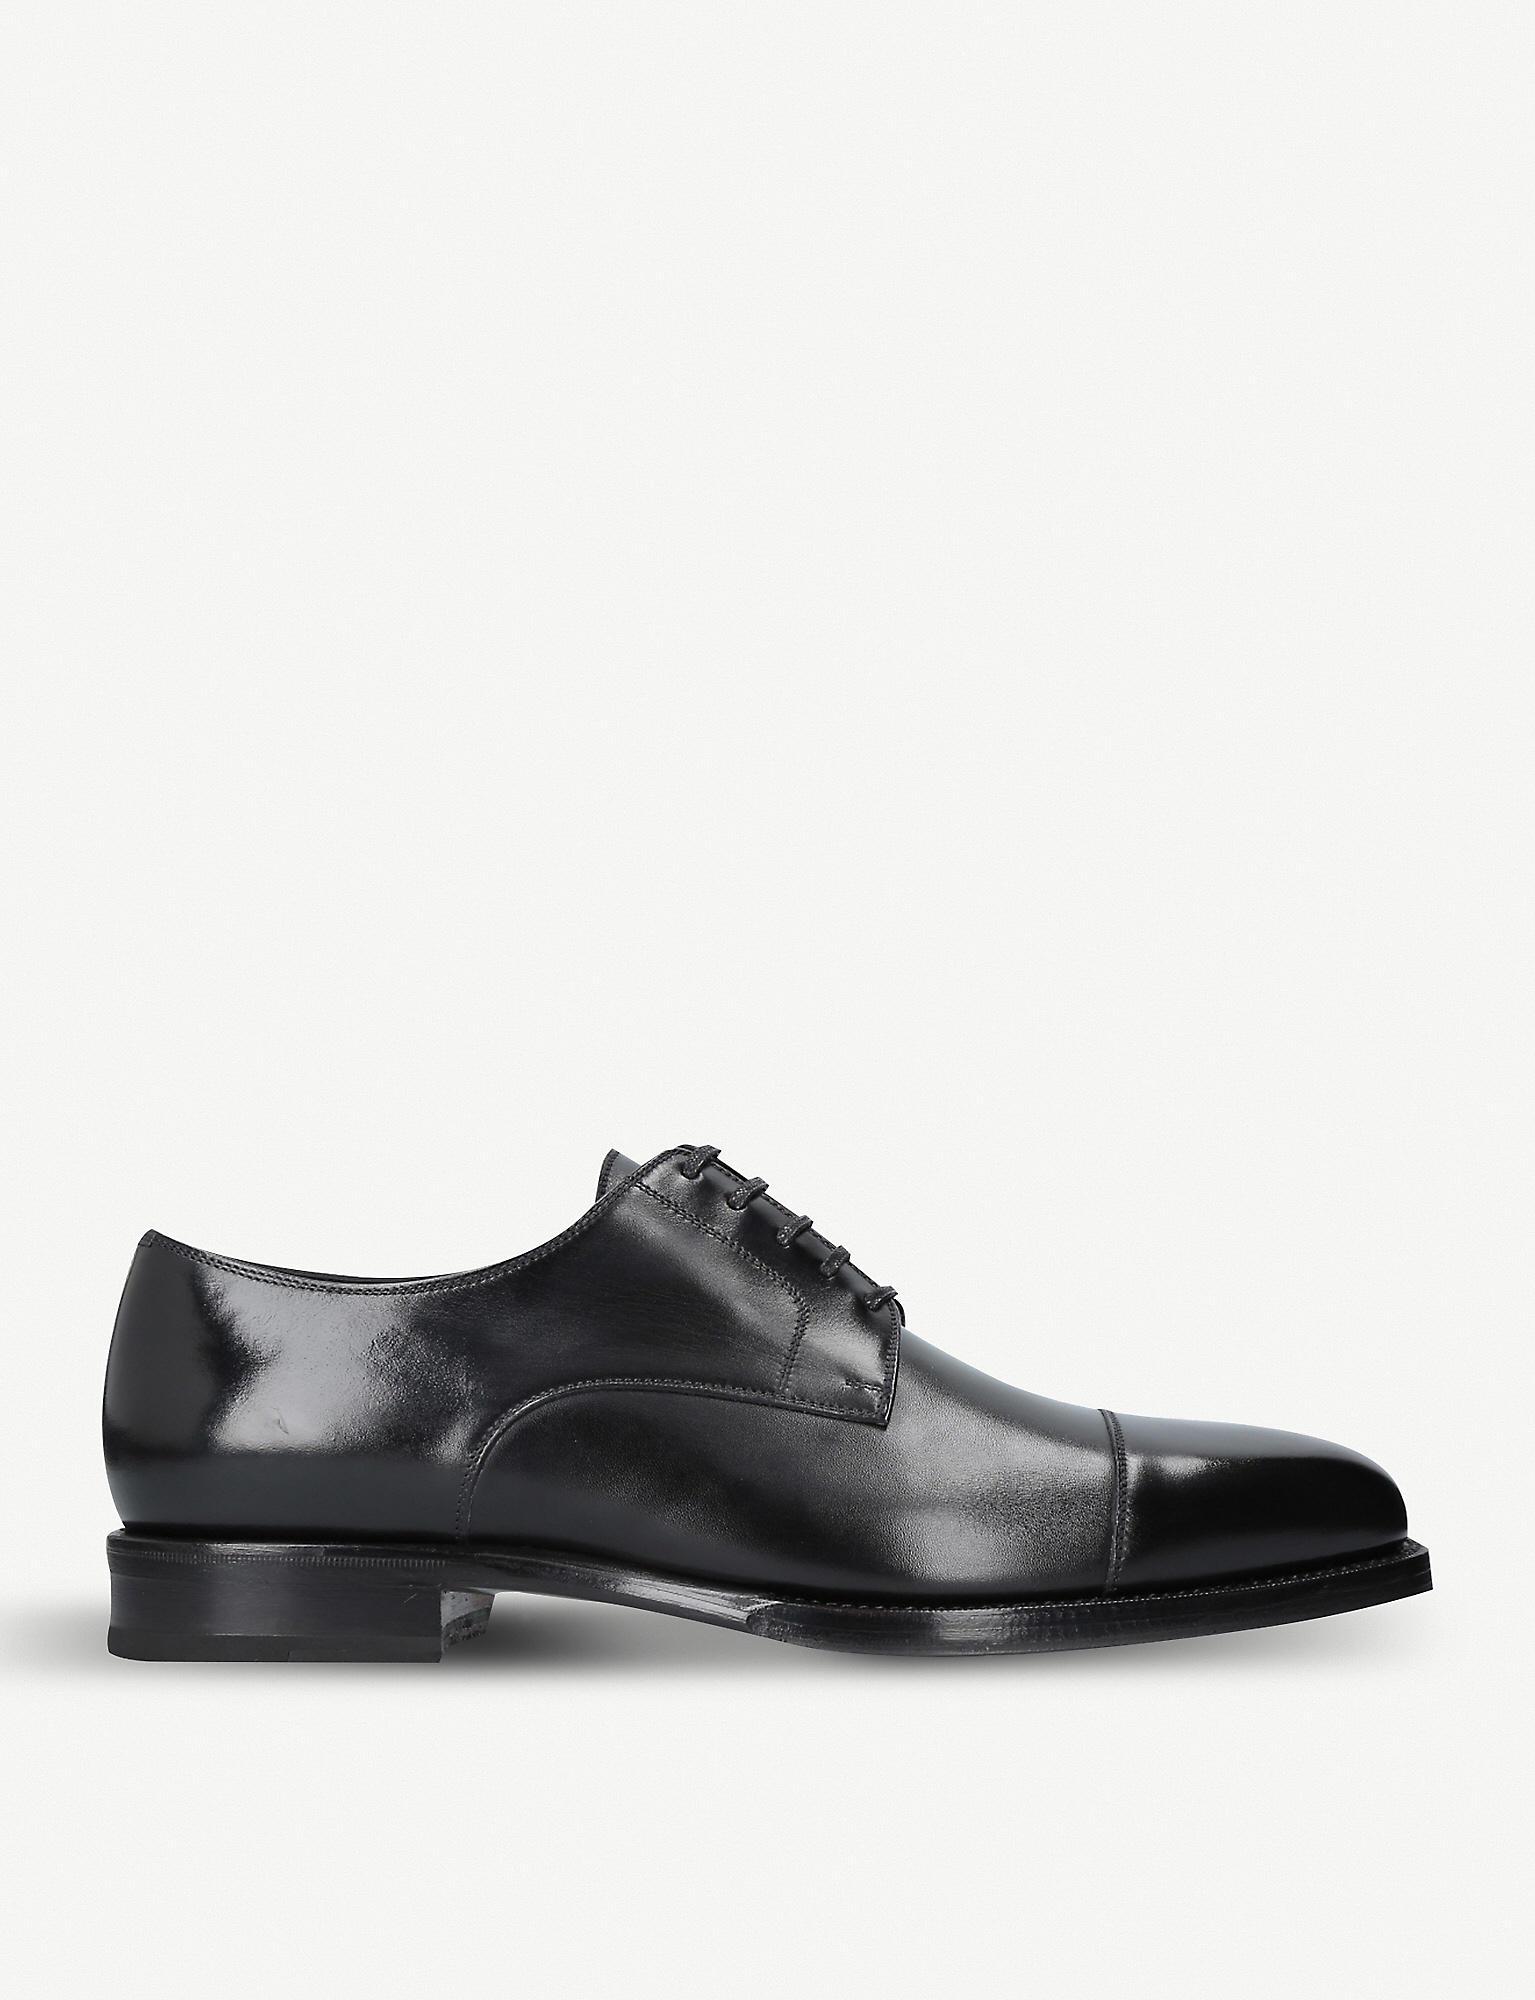 Tom Ford Wessex Leather Derby Shoes in Black for Men - Lyst